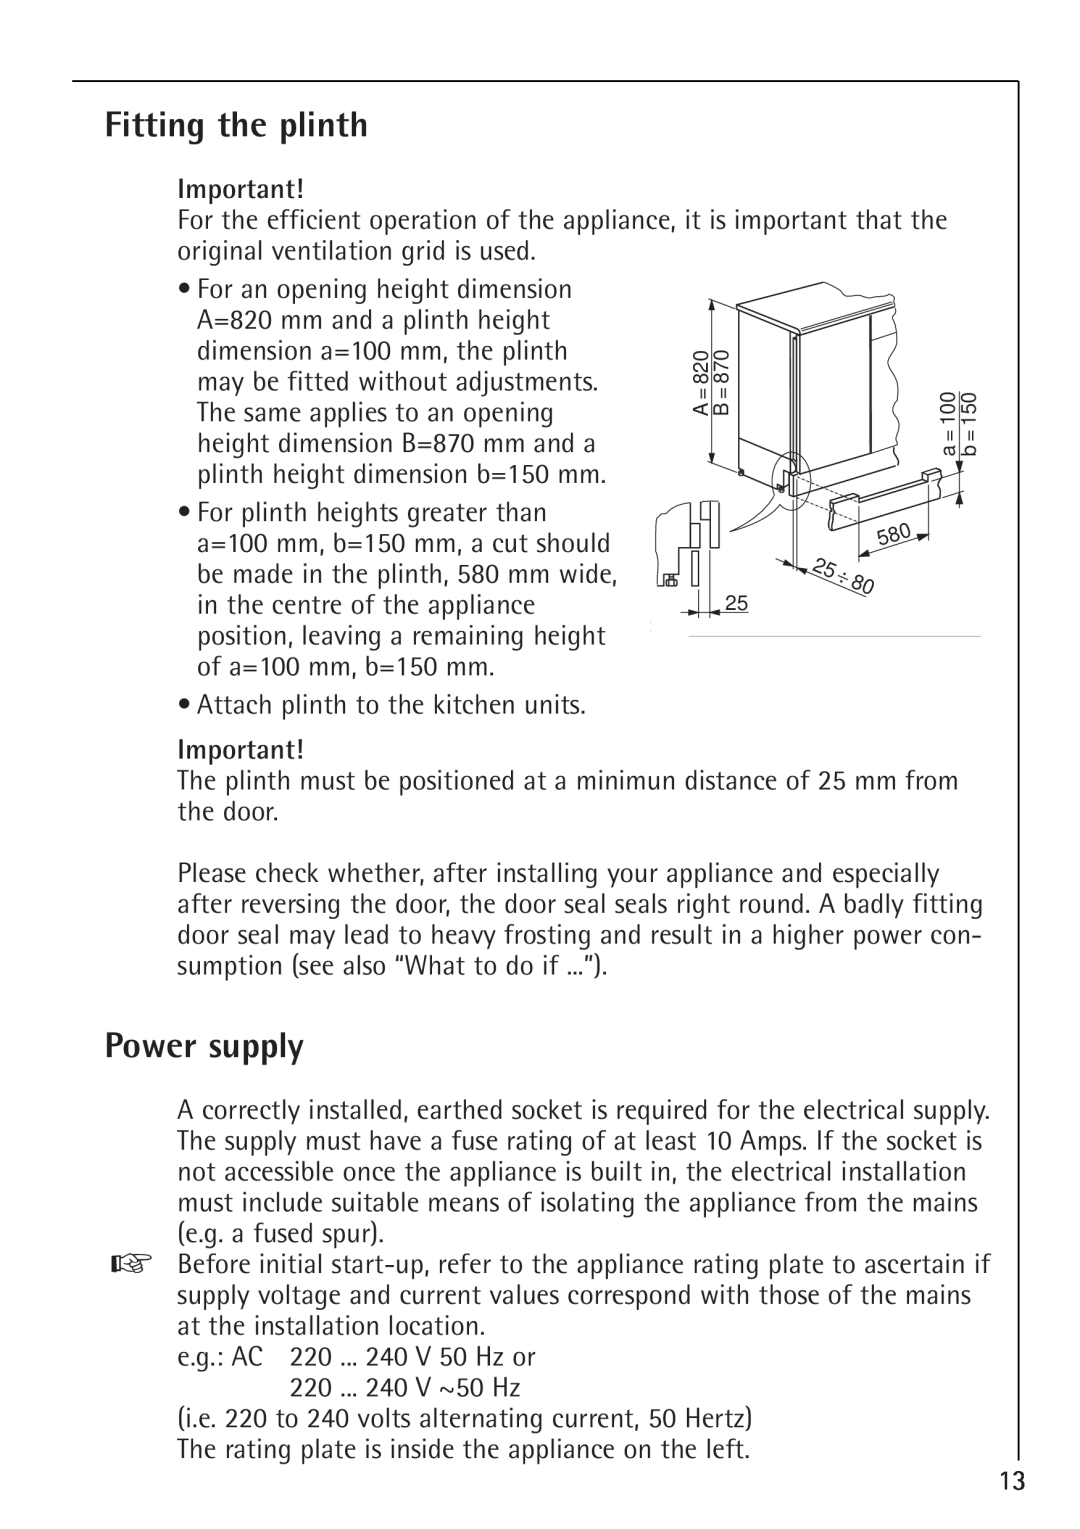 Electrolux 1254-6 iU installation instructions Fitting the plinth, Power supply 